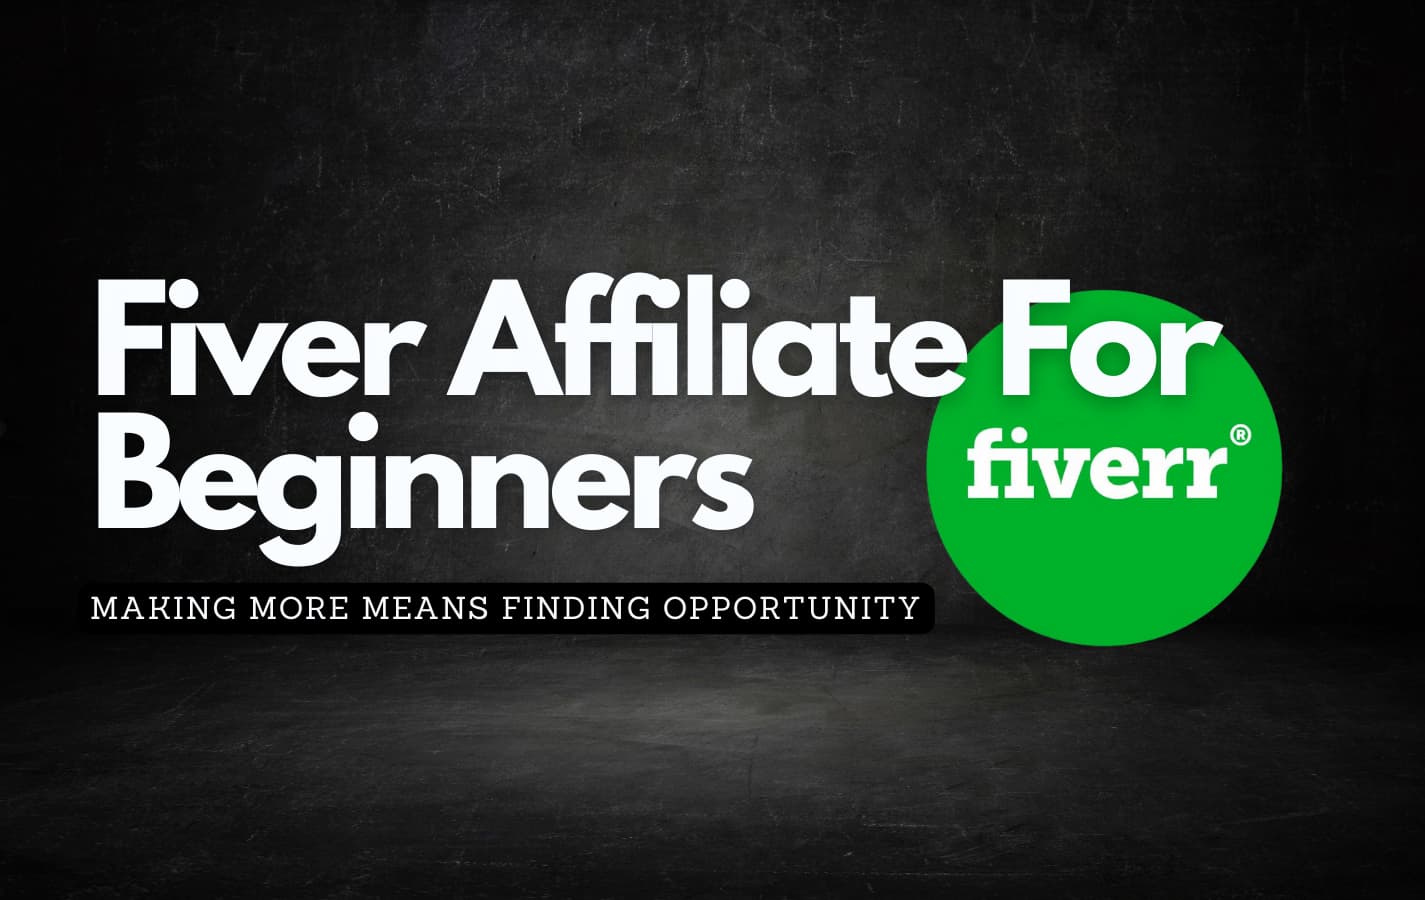 Fiverr logo against a dark background with the text overlay about learning Fiverr Affiliate option